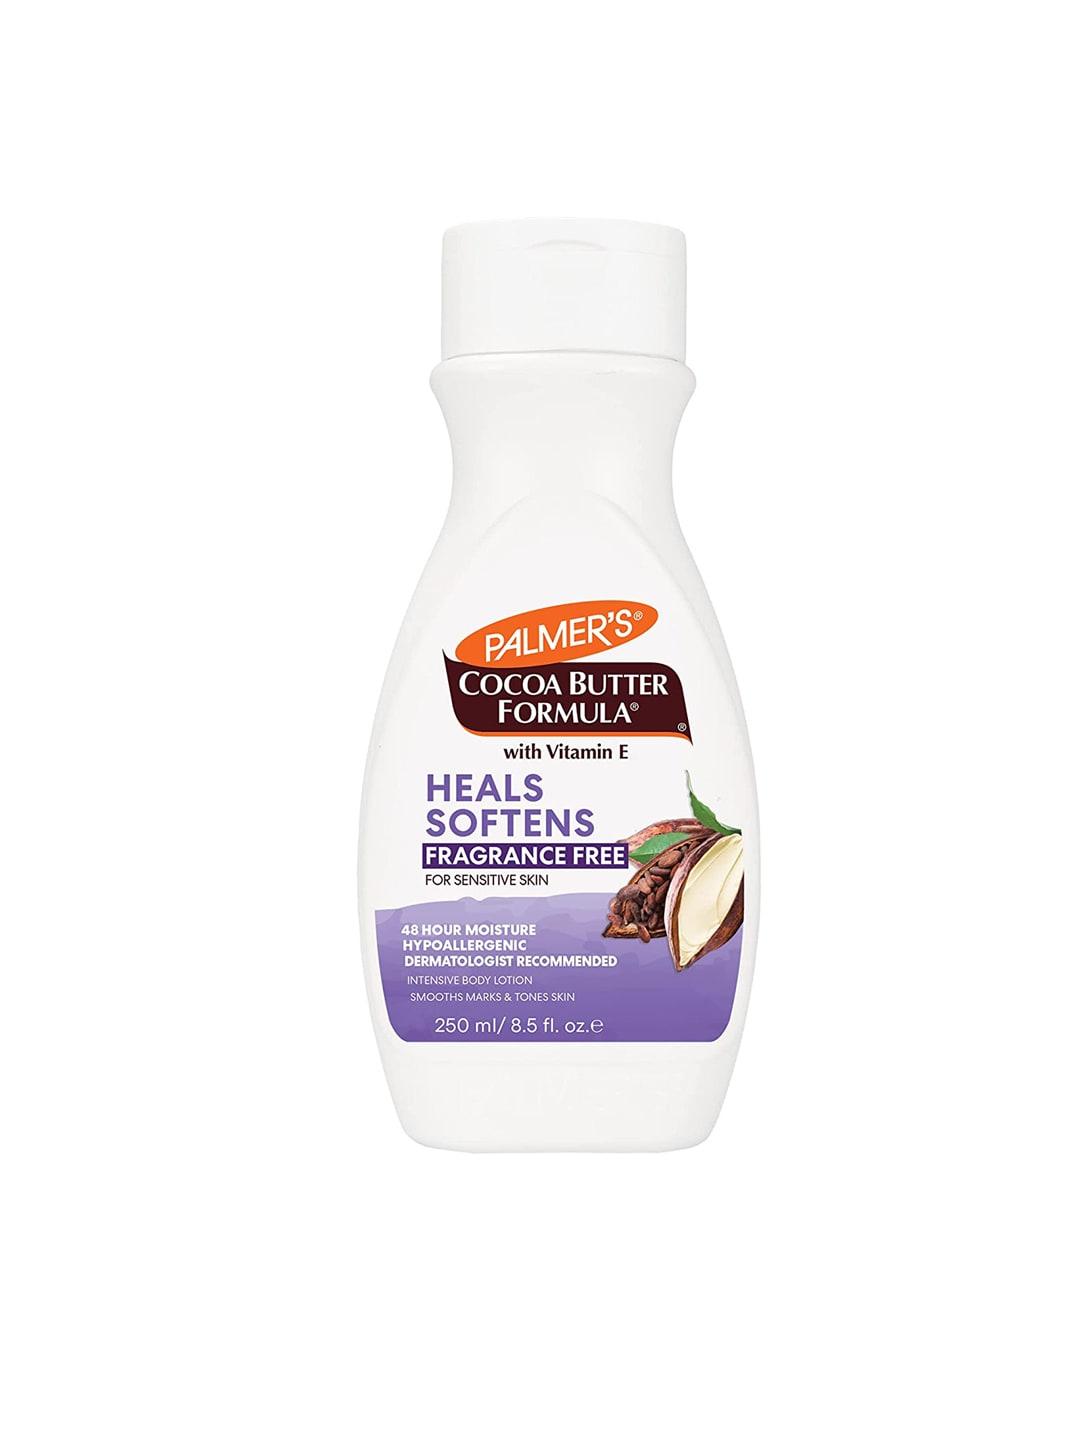 Palmer's Heals Softens Cocoa Butter Fragrance-Free Body Lotion For Sensitive Skin - 250ml